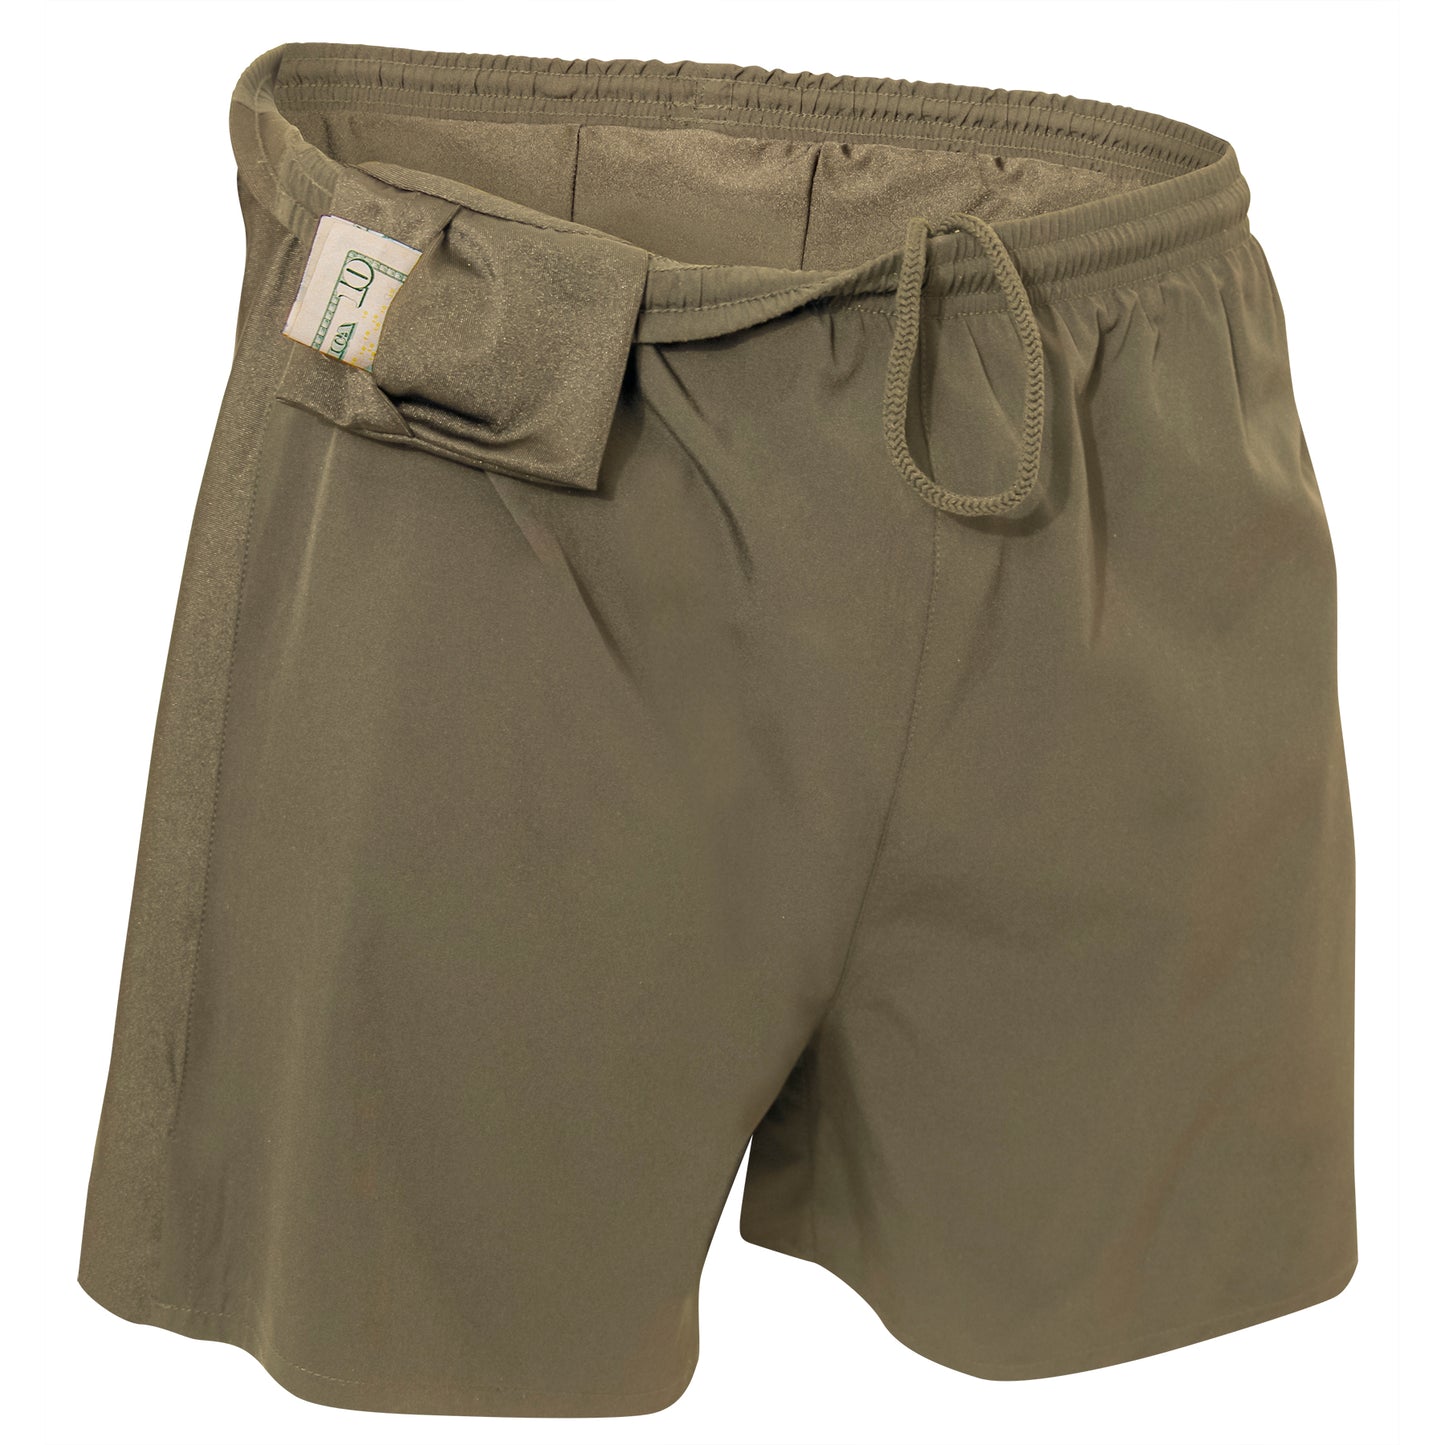 GI Style Athletic Shorts With Liner - Rothco Physical Training PT Shorts